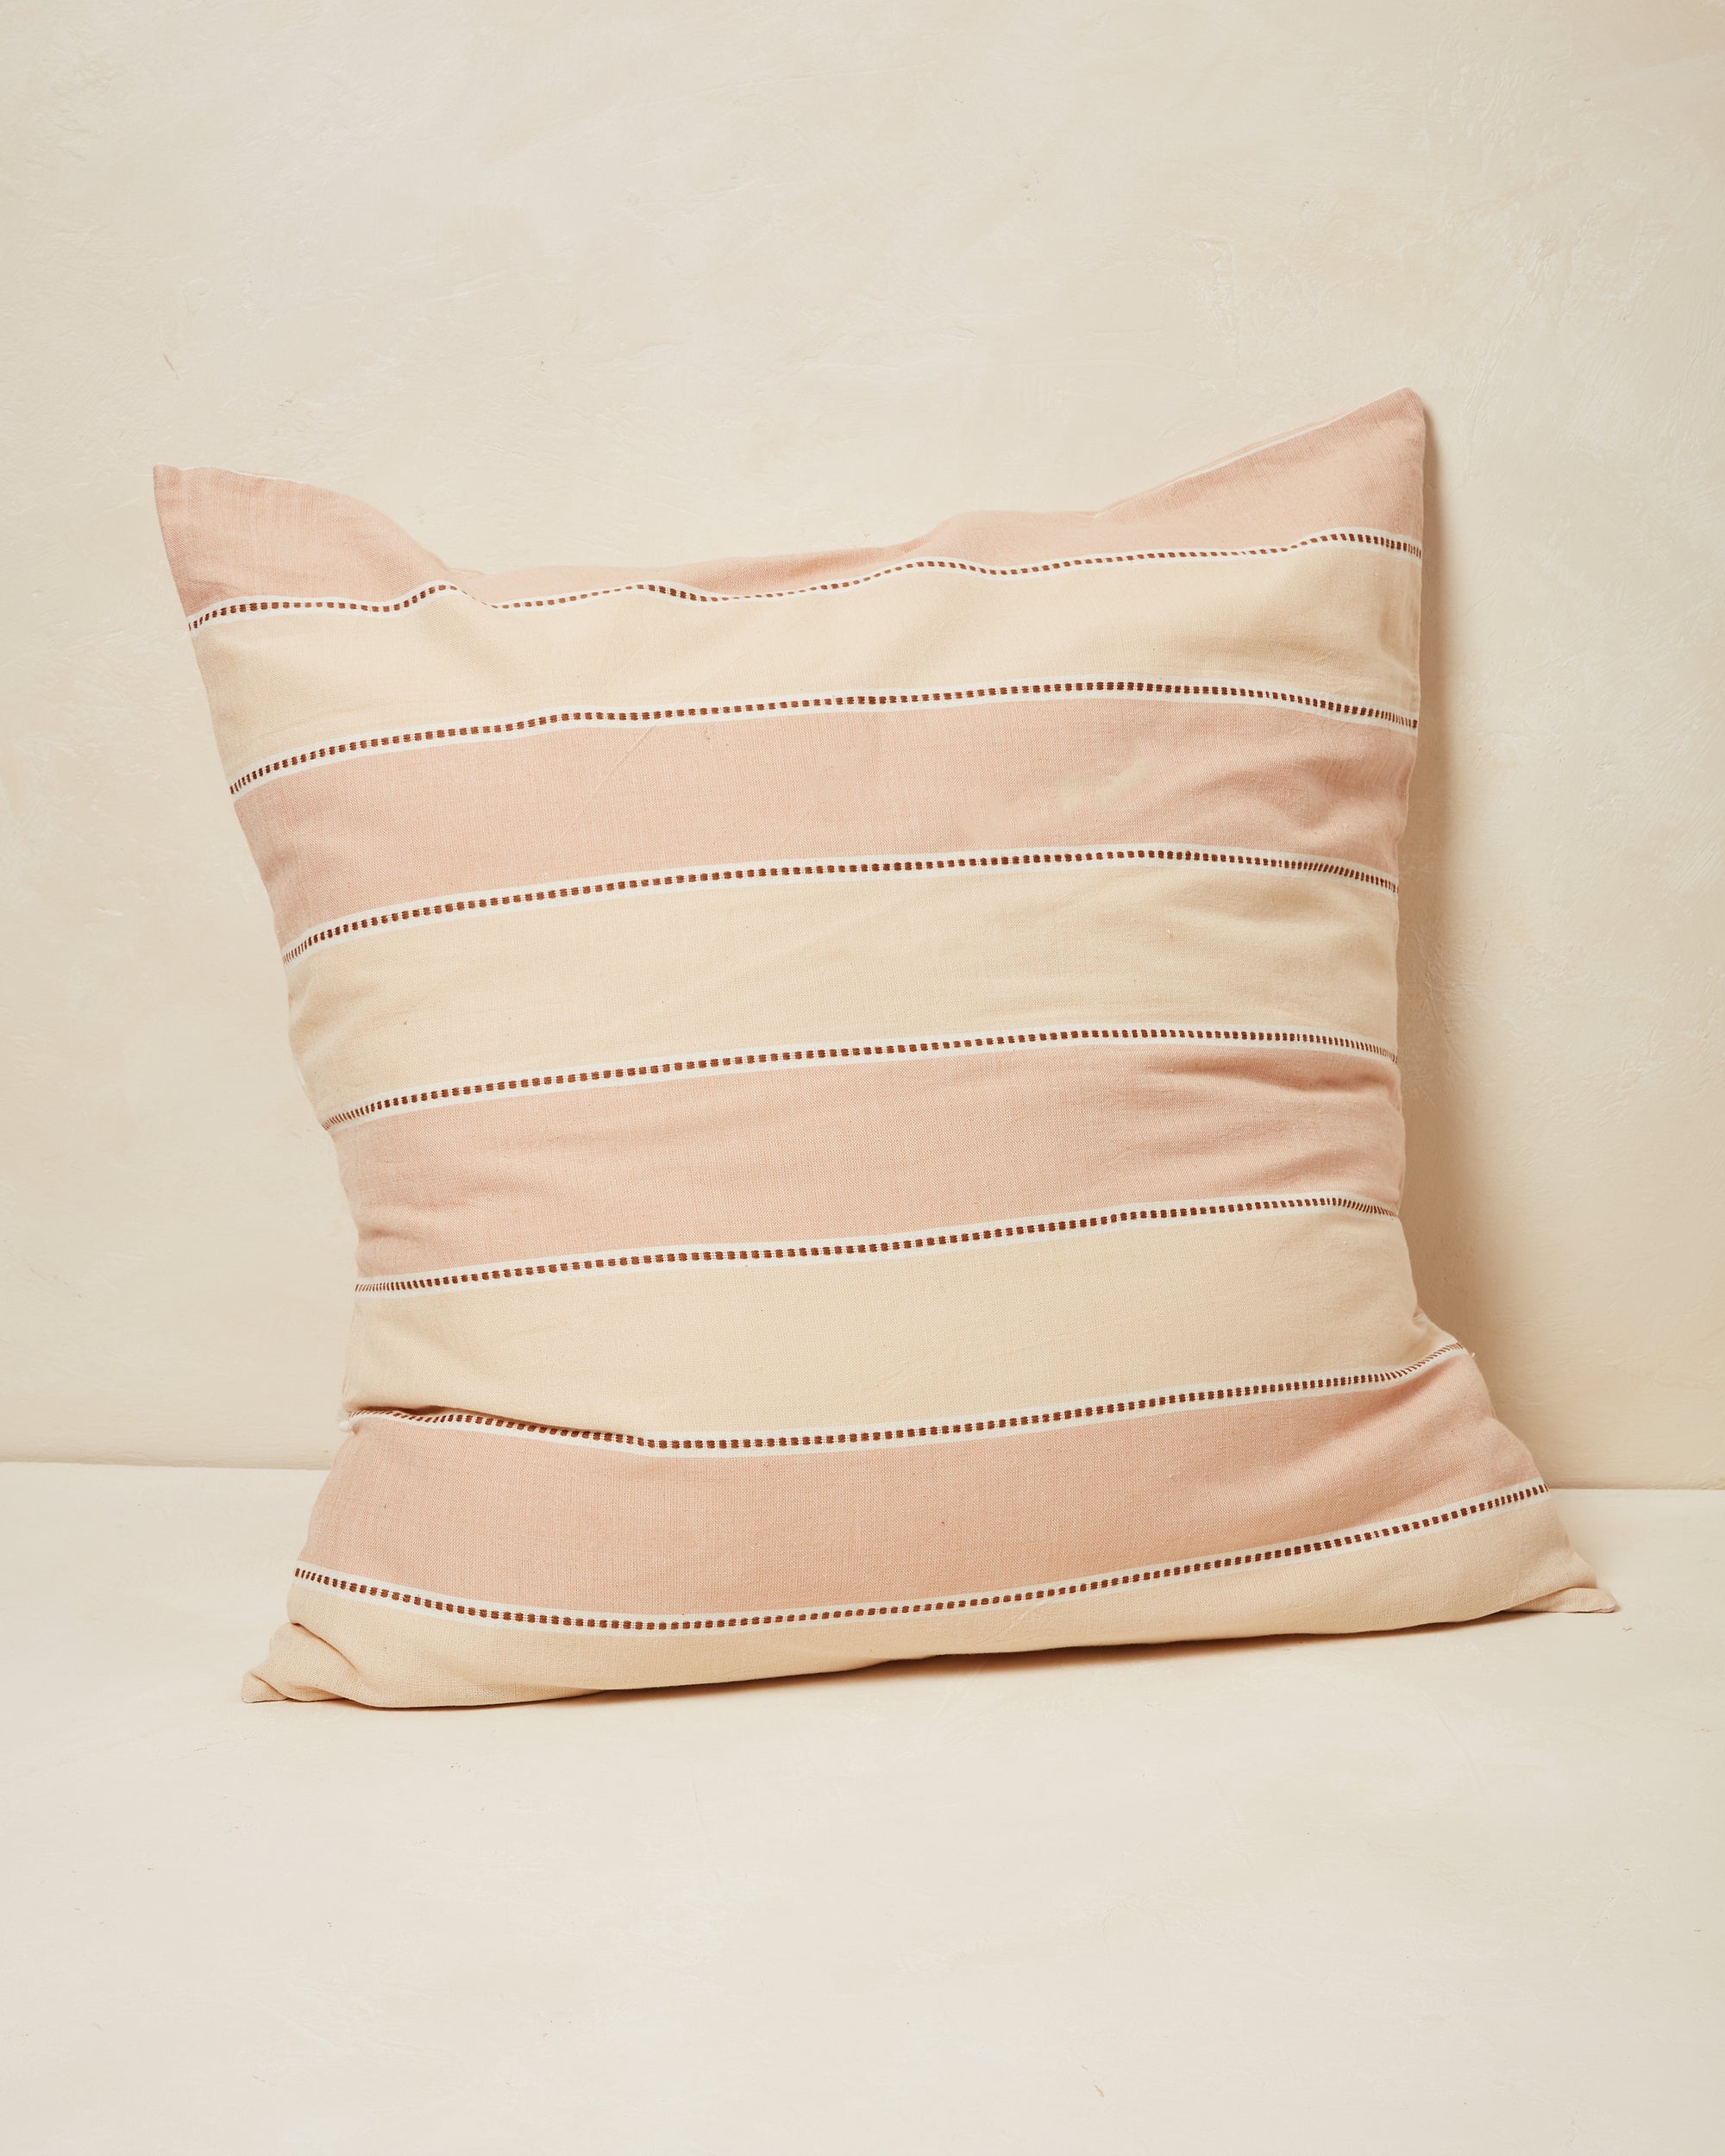 Ethically handwoven oeko-tex certified cotton MINNA pillowcases, cream and clay stripes